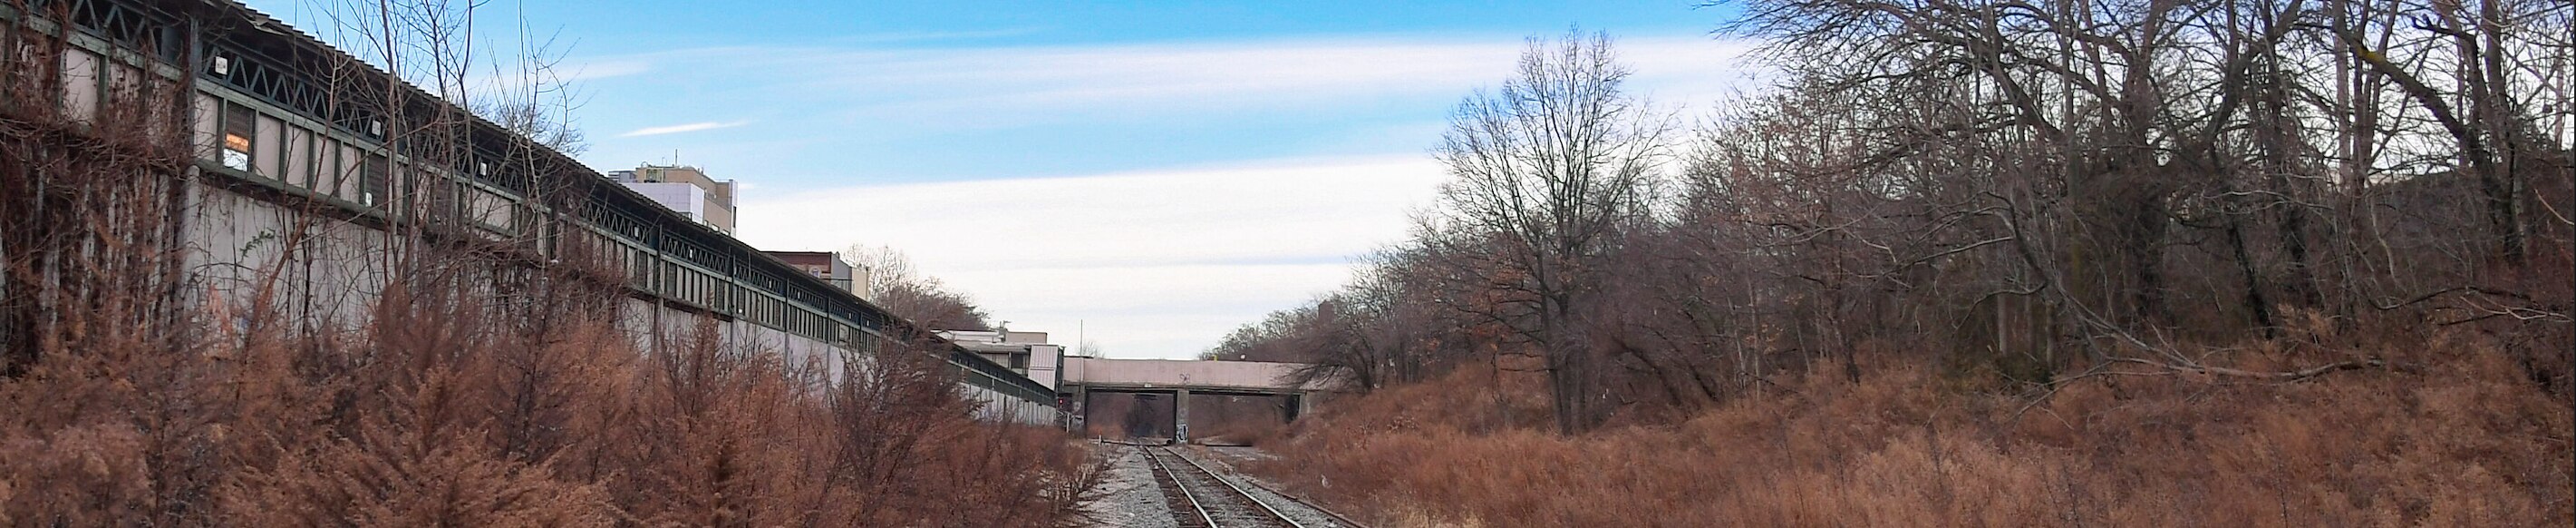 An abandoned rail line surrounded by trees